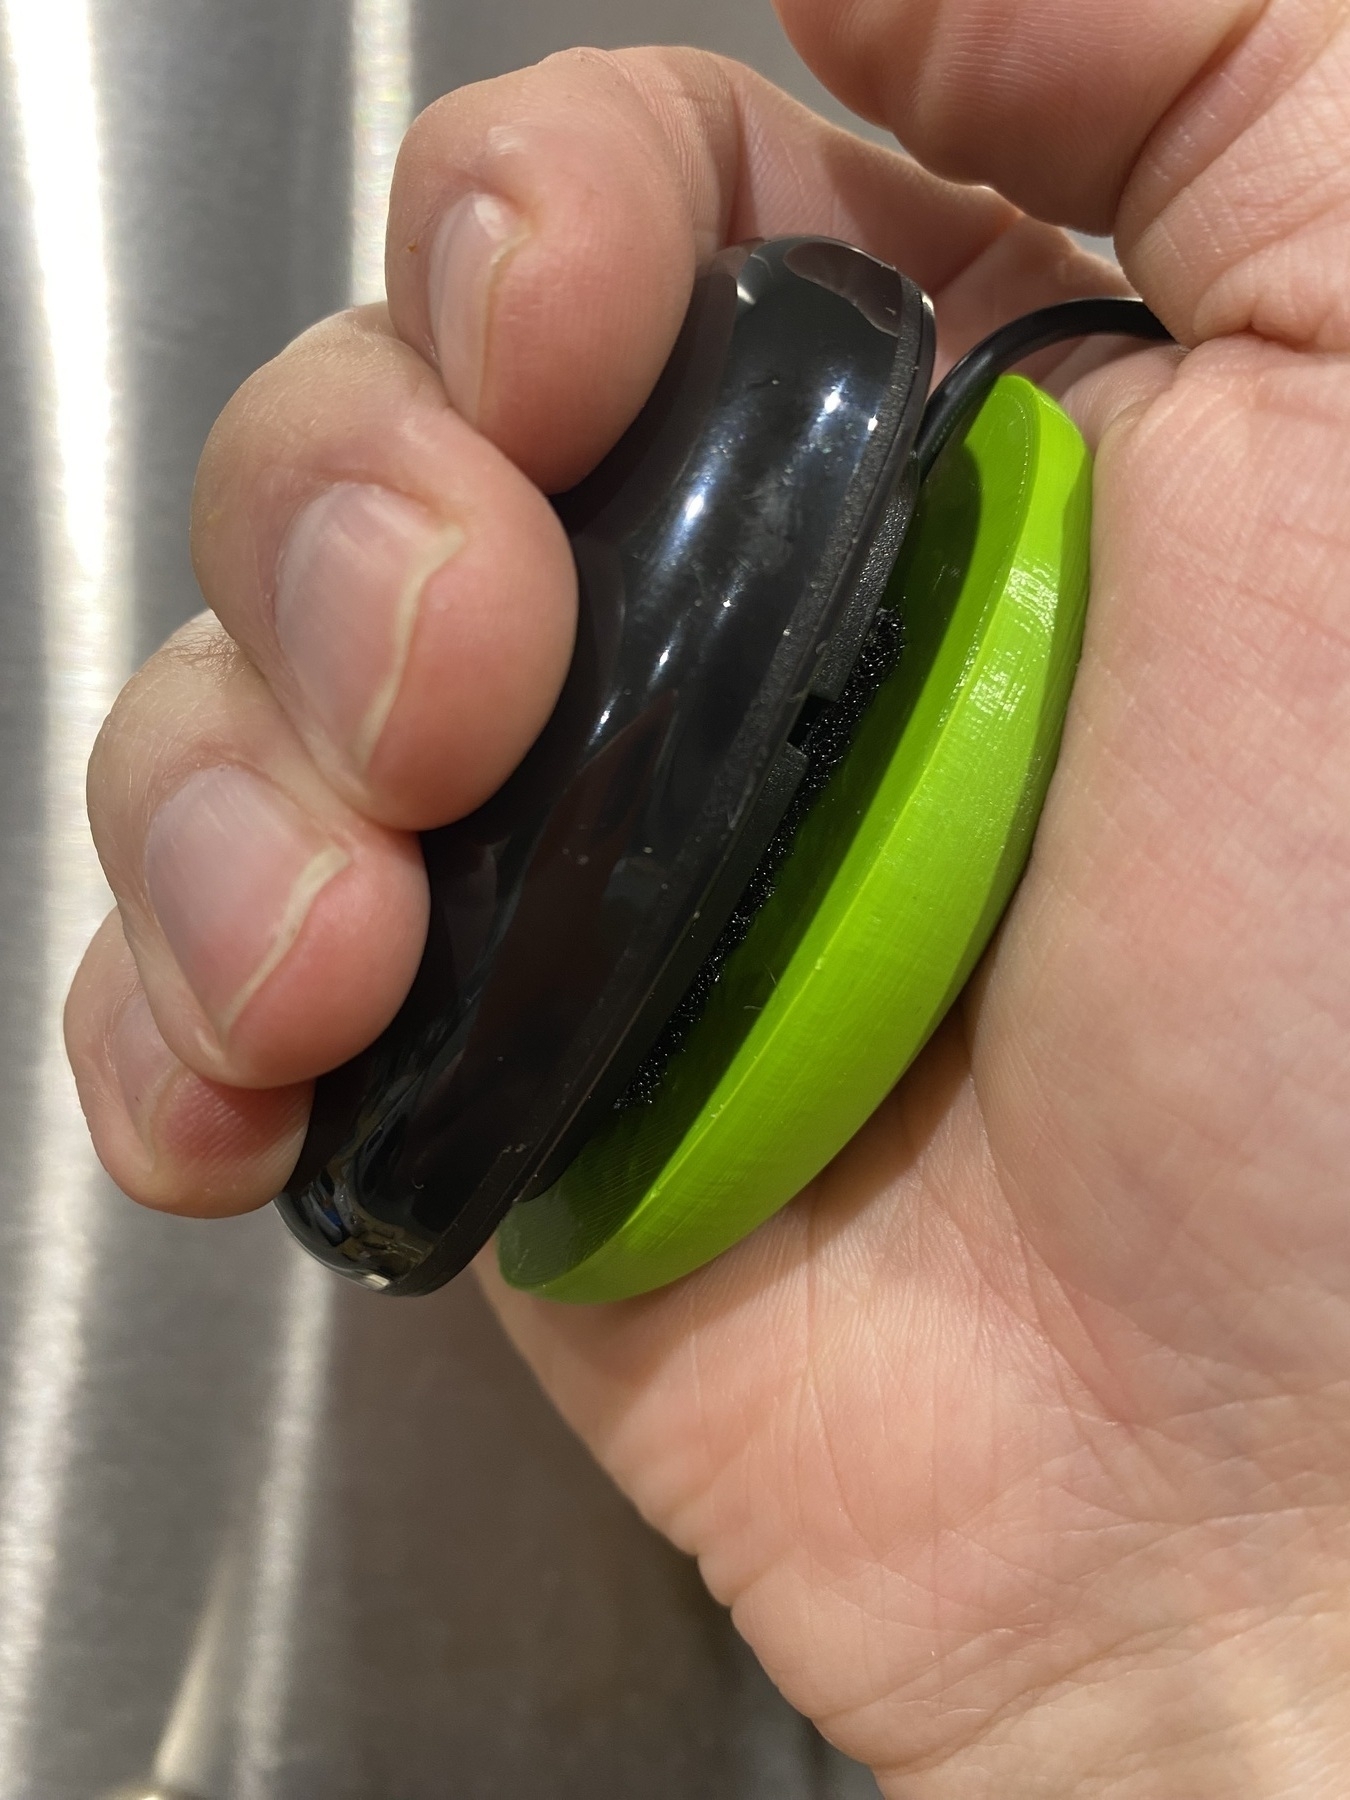 Picture of egg switch in the hand with 